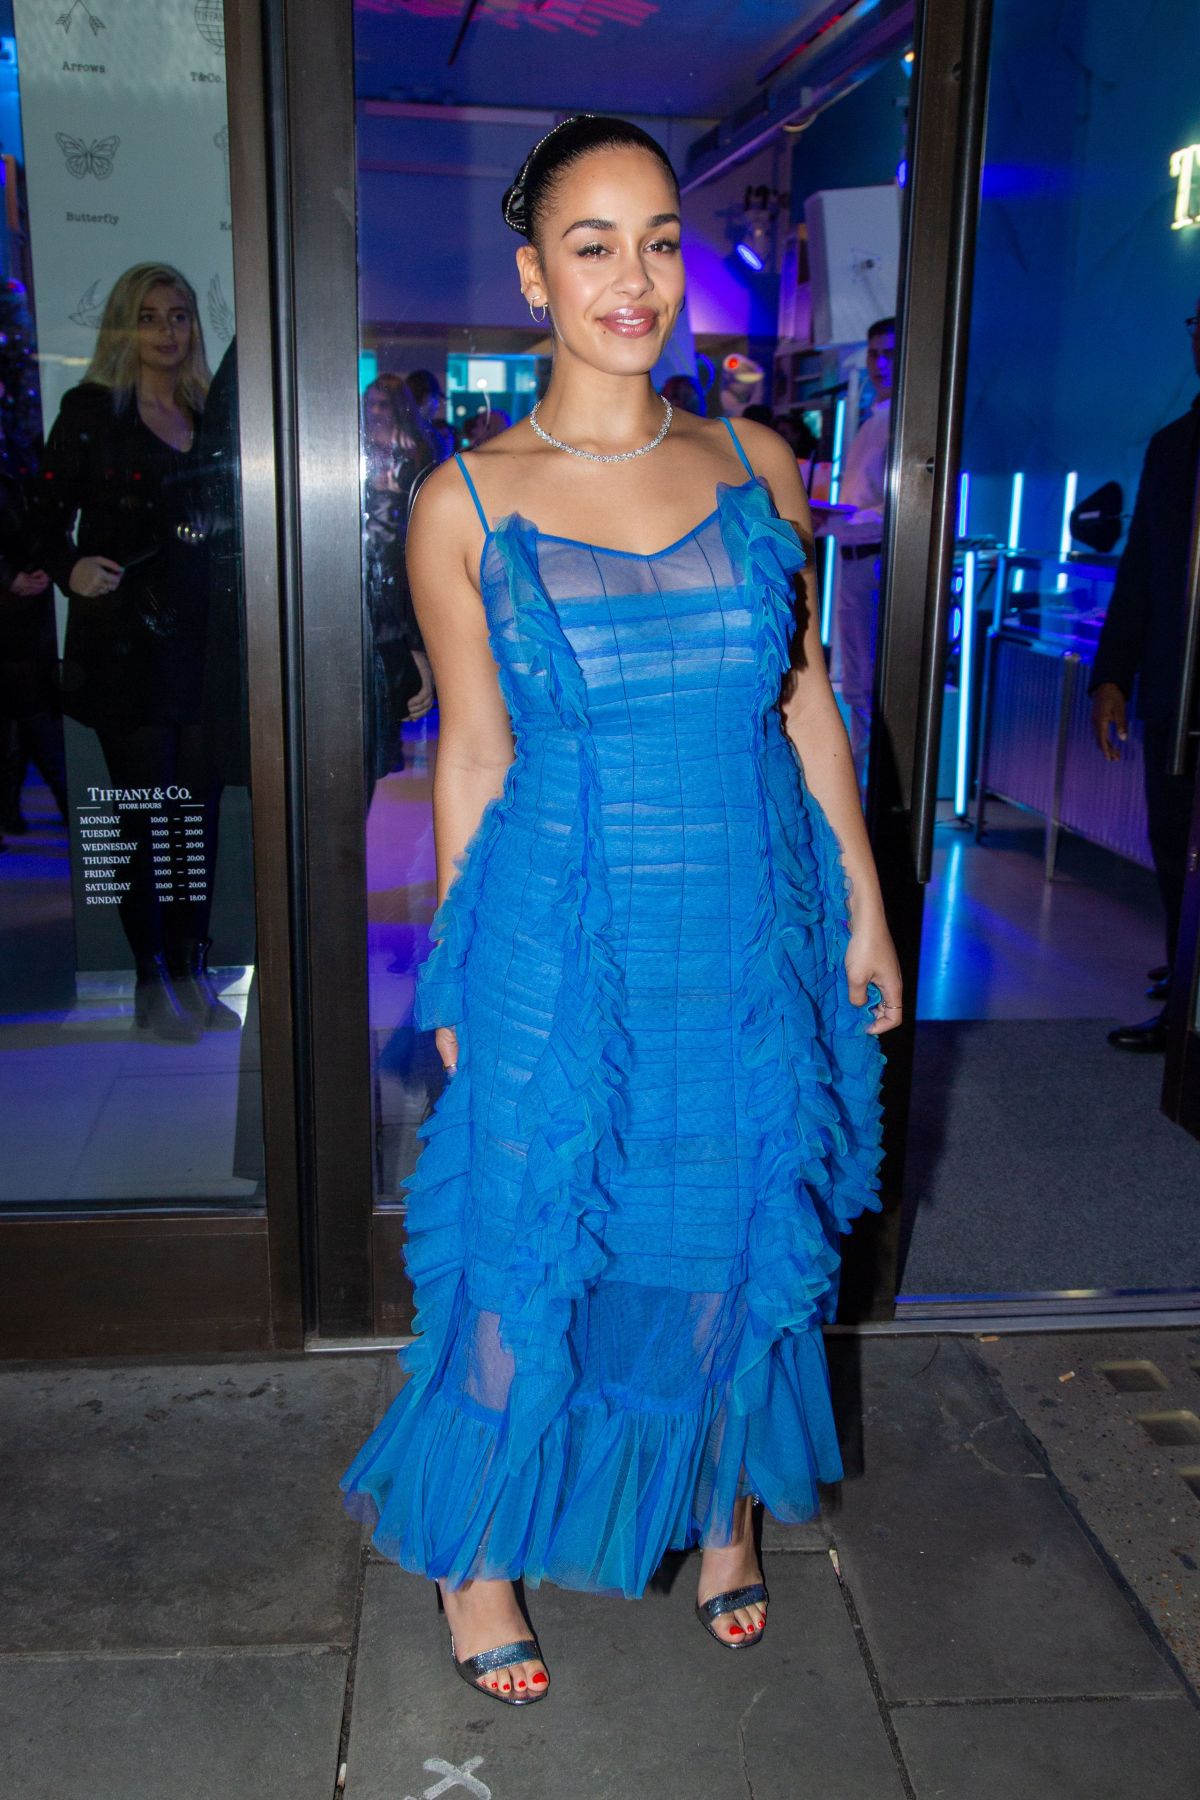 JORJA SMITH at Tiffany & Co. Concept Store in London 11/08/2018 ...